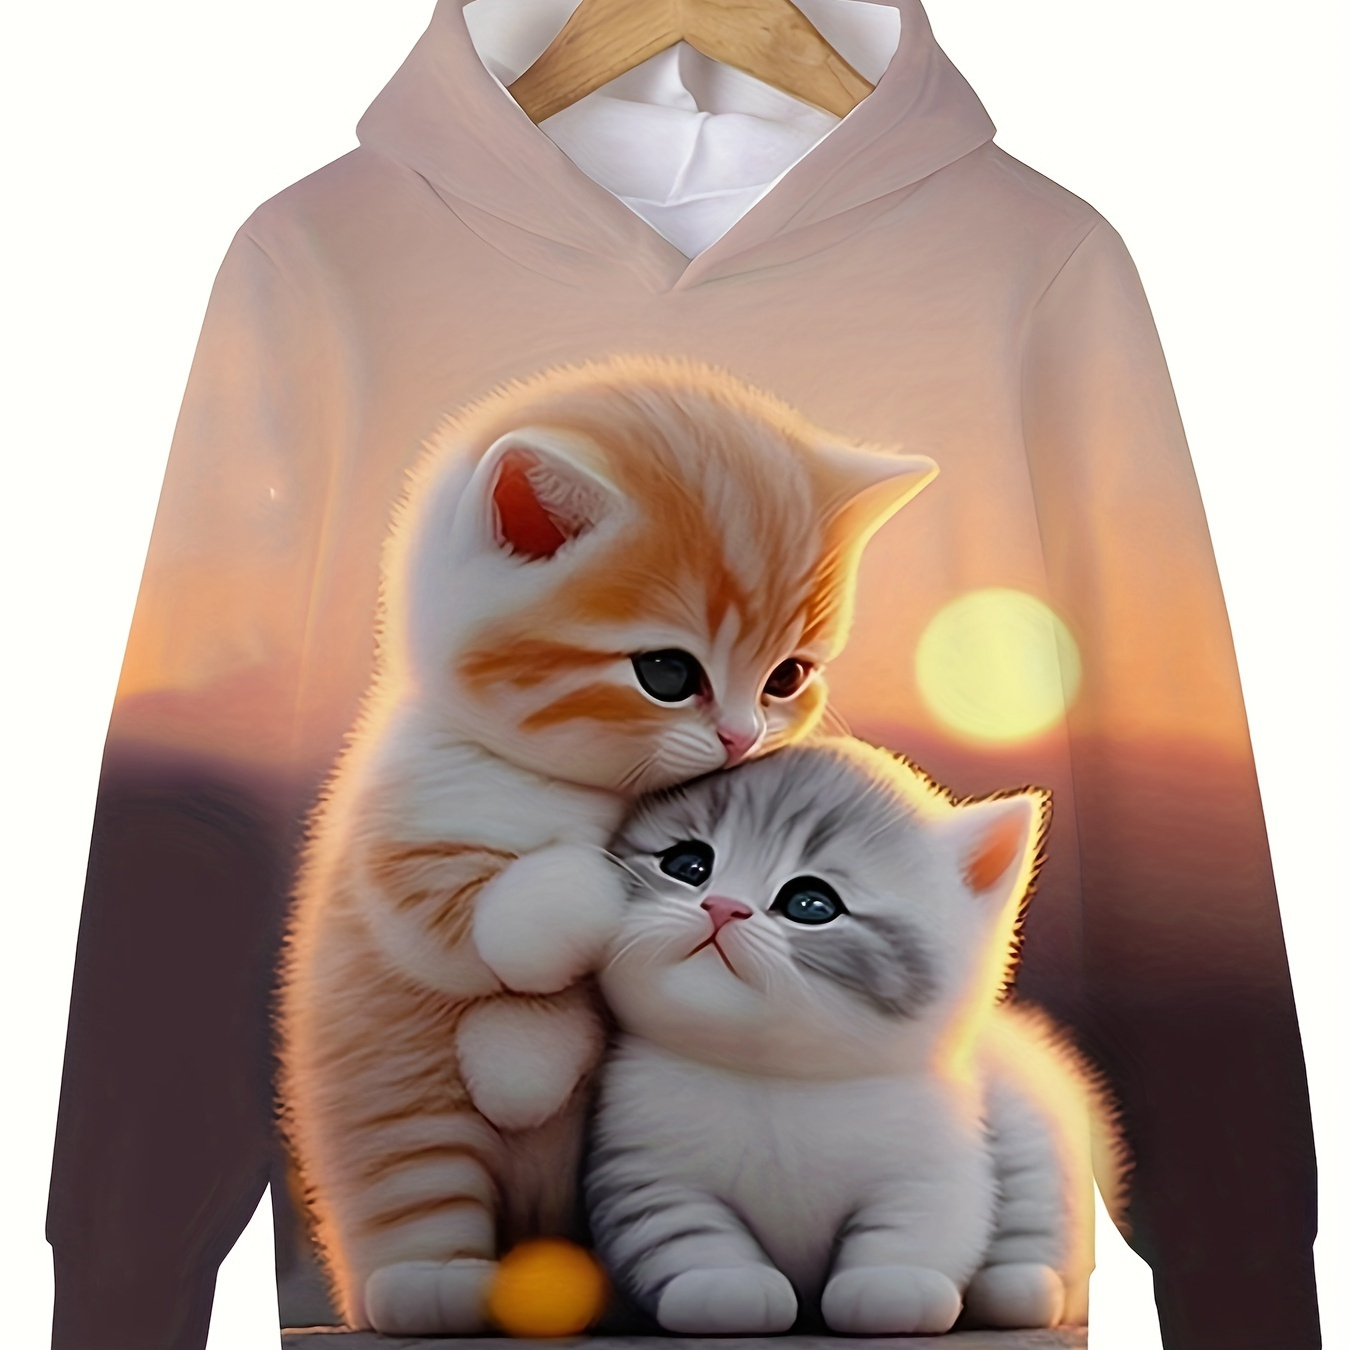 

Sunset Kitten Graphic Hooded Sweatshirt Long Sleeve Pullover Casual Tops Girls Sports